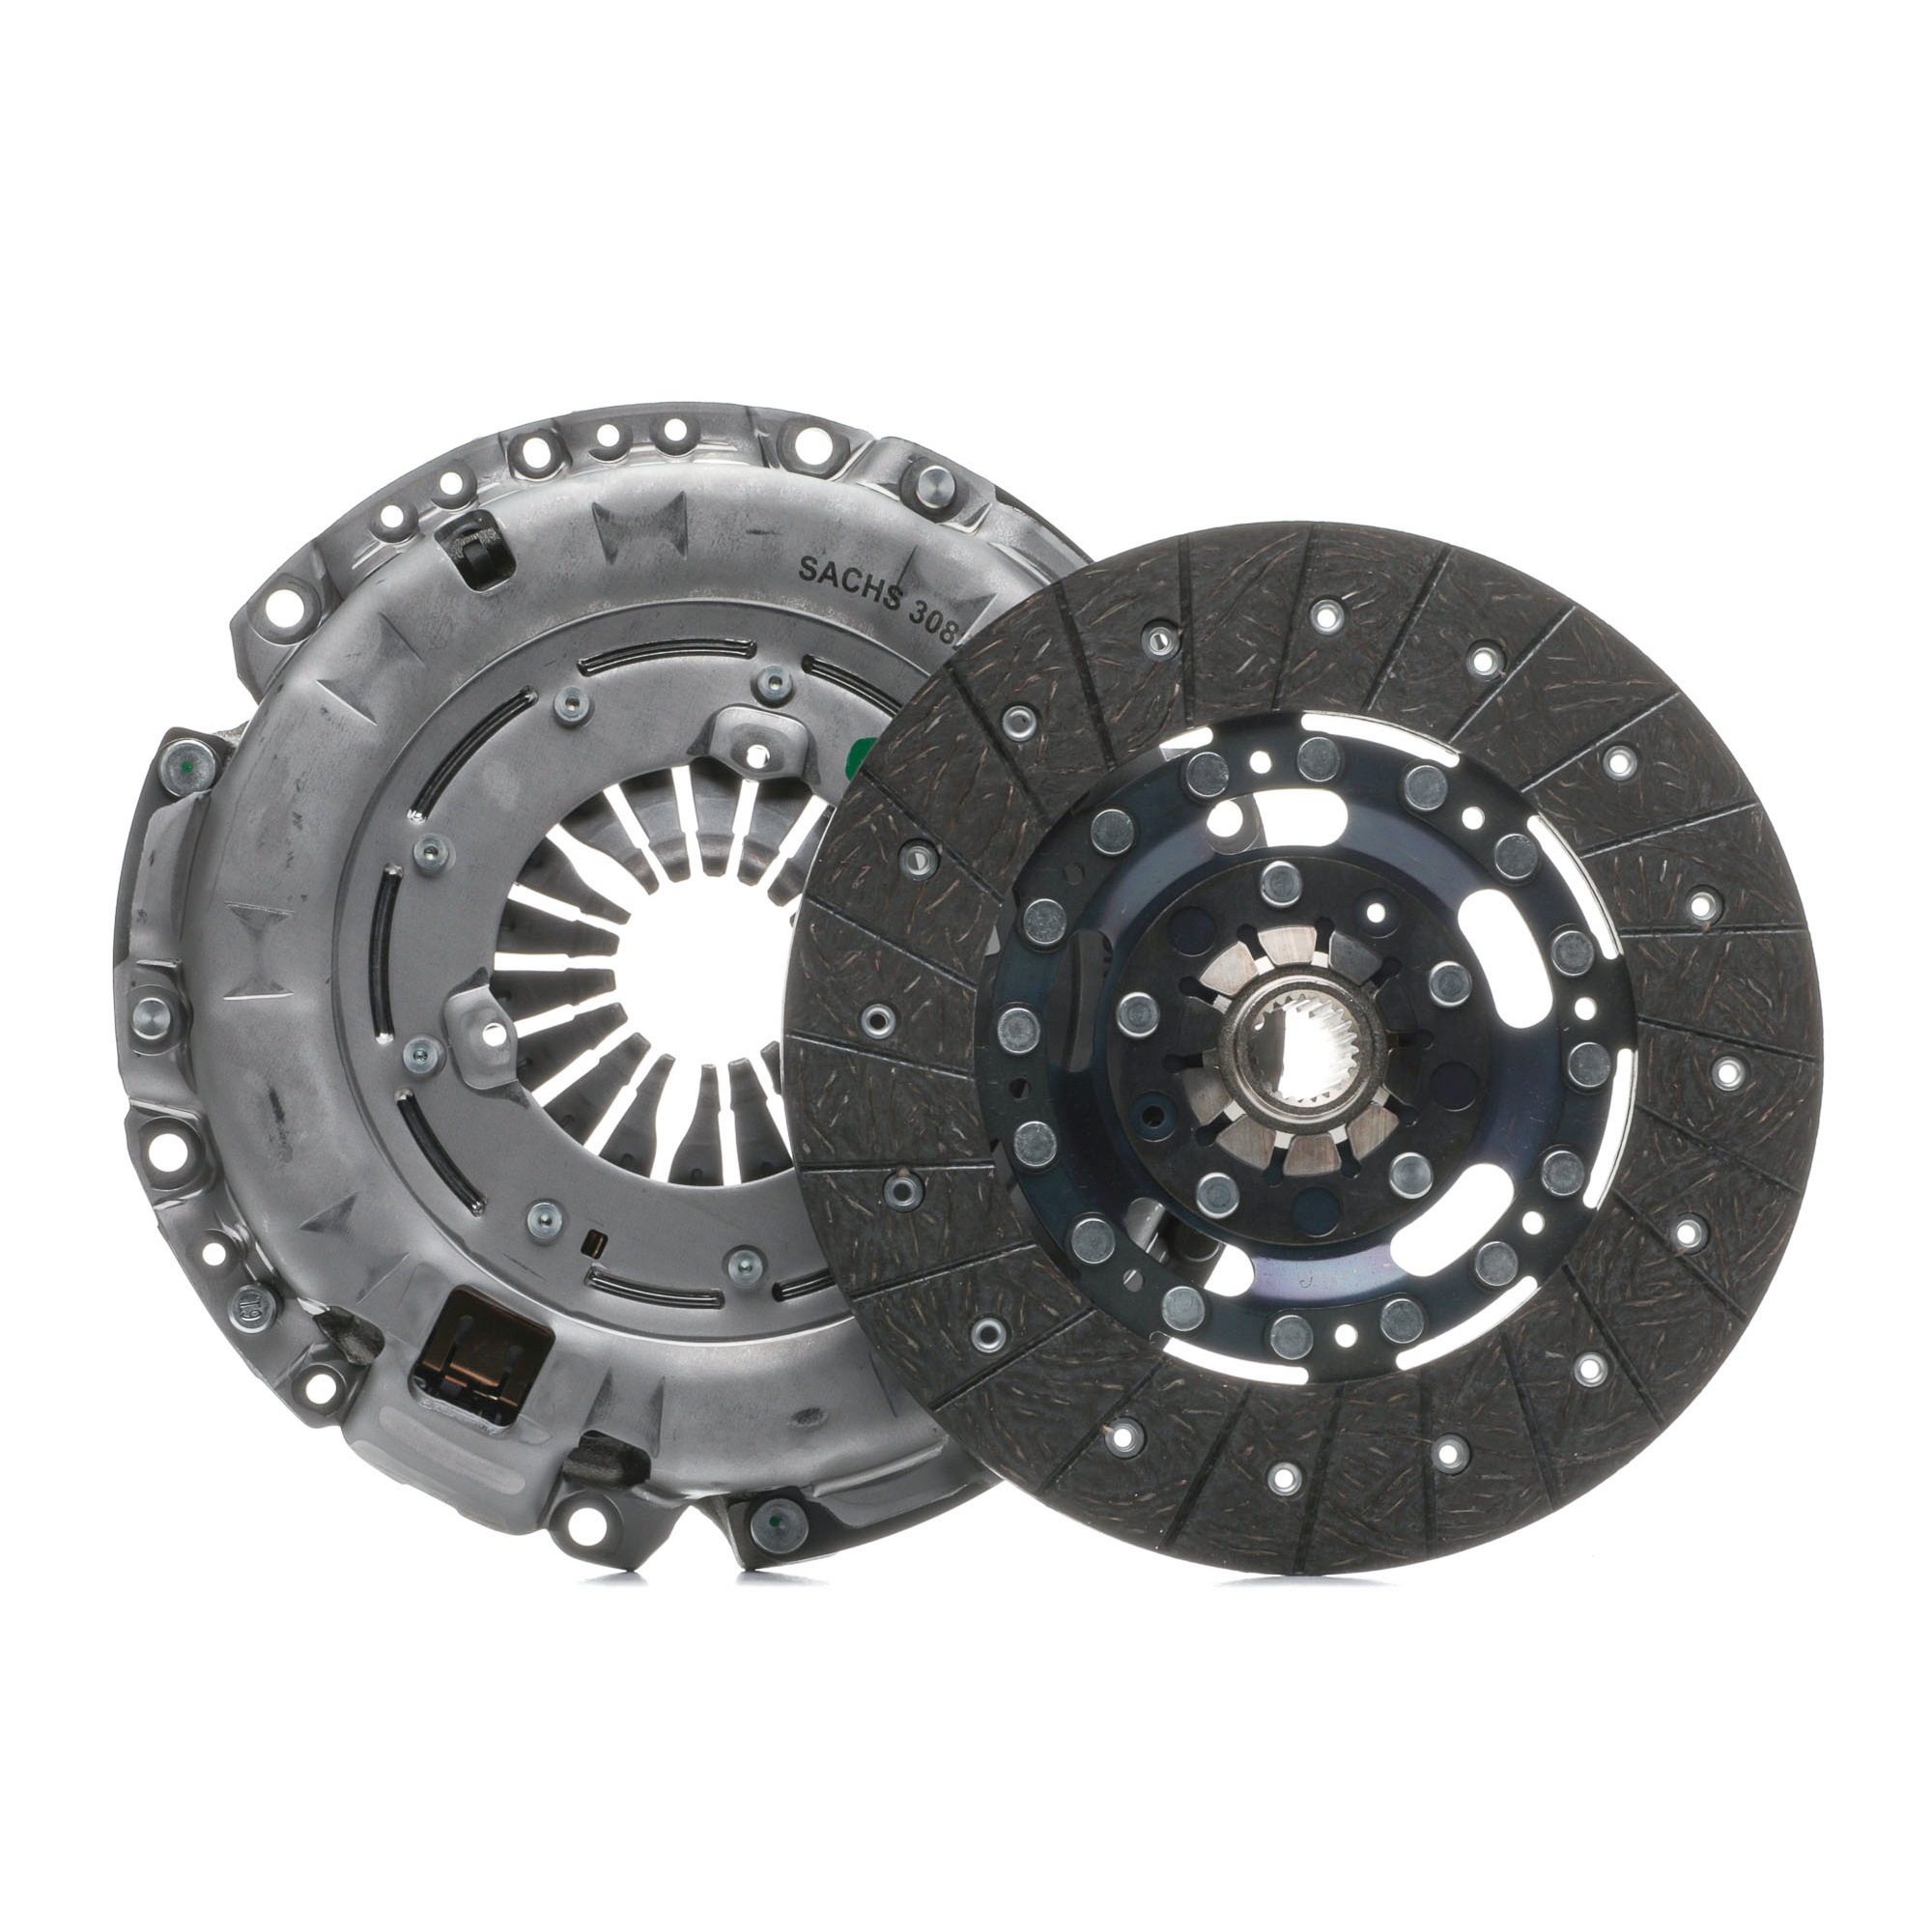 SACHS 3000 951 477 Clutch kit CHEVROLET experience and price